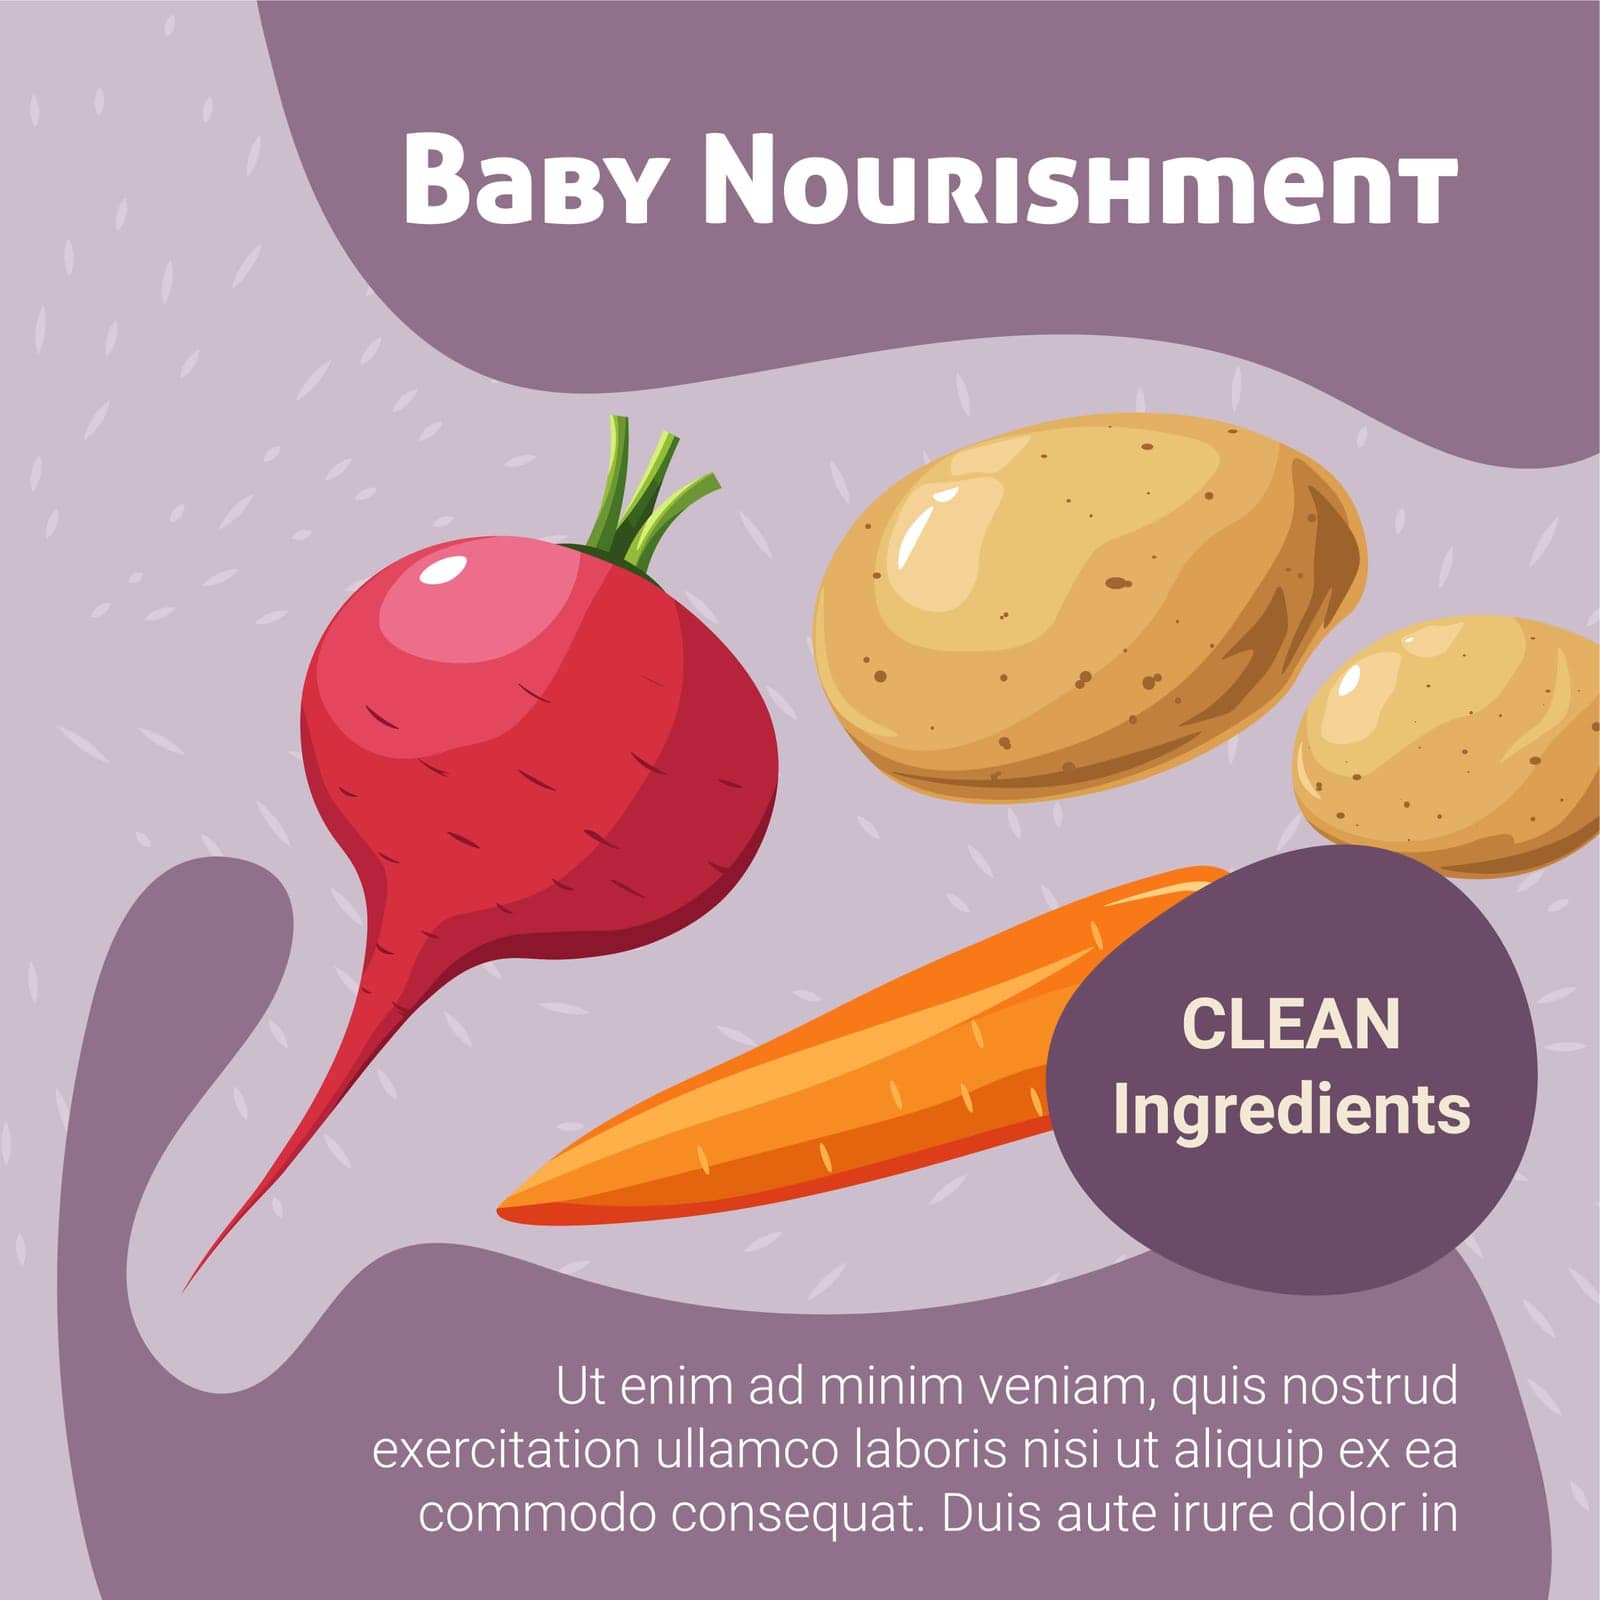 Clean ingredients and plant based meal courses for baby nourishment. Tasty eating, feeding fresh vegetables, beetroot and potato. Promotional banner, leaflet or flyer, advertisement vector in flat